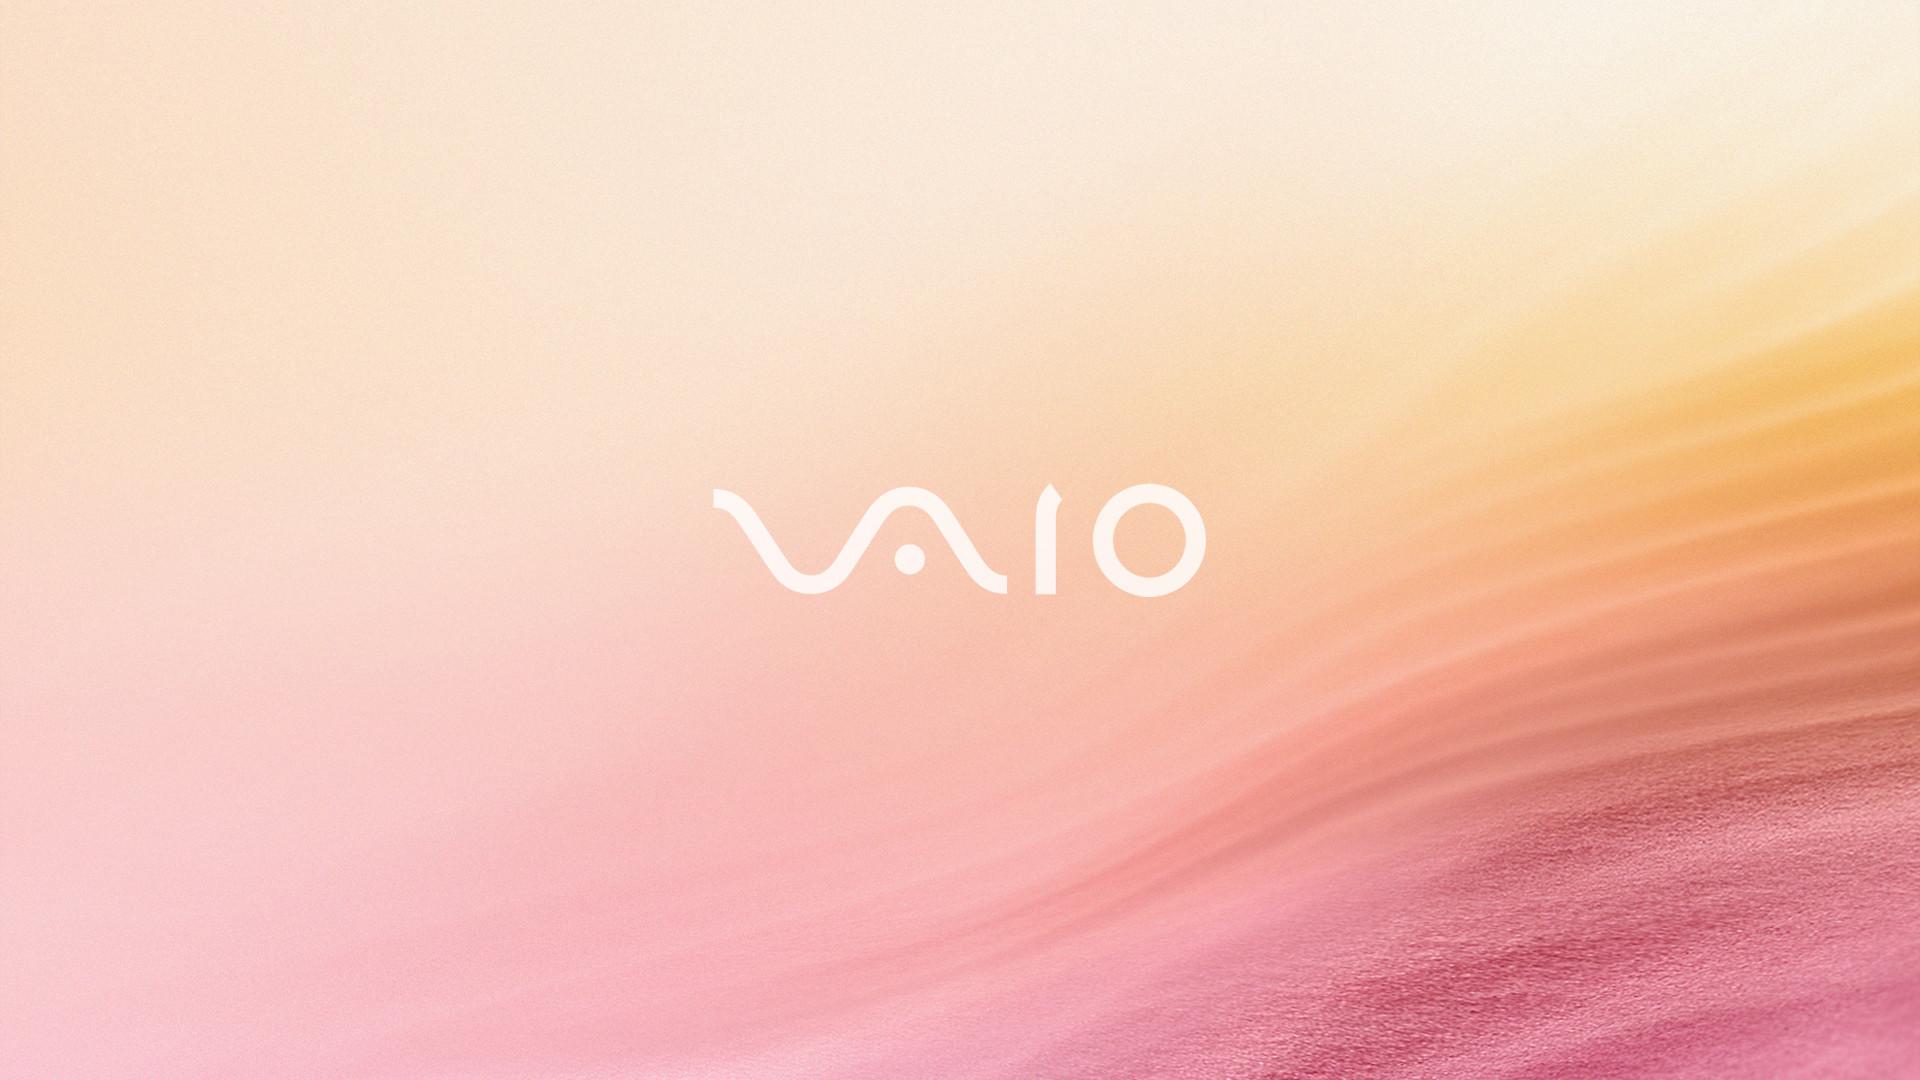 1920x1080  Pink Vaio Background. How to set wallpaper on your desktop? Click  the download link from above and set the wallpaper on the desktop from your  OS.